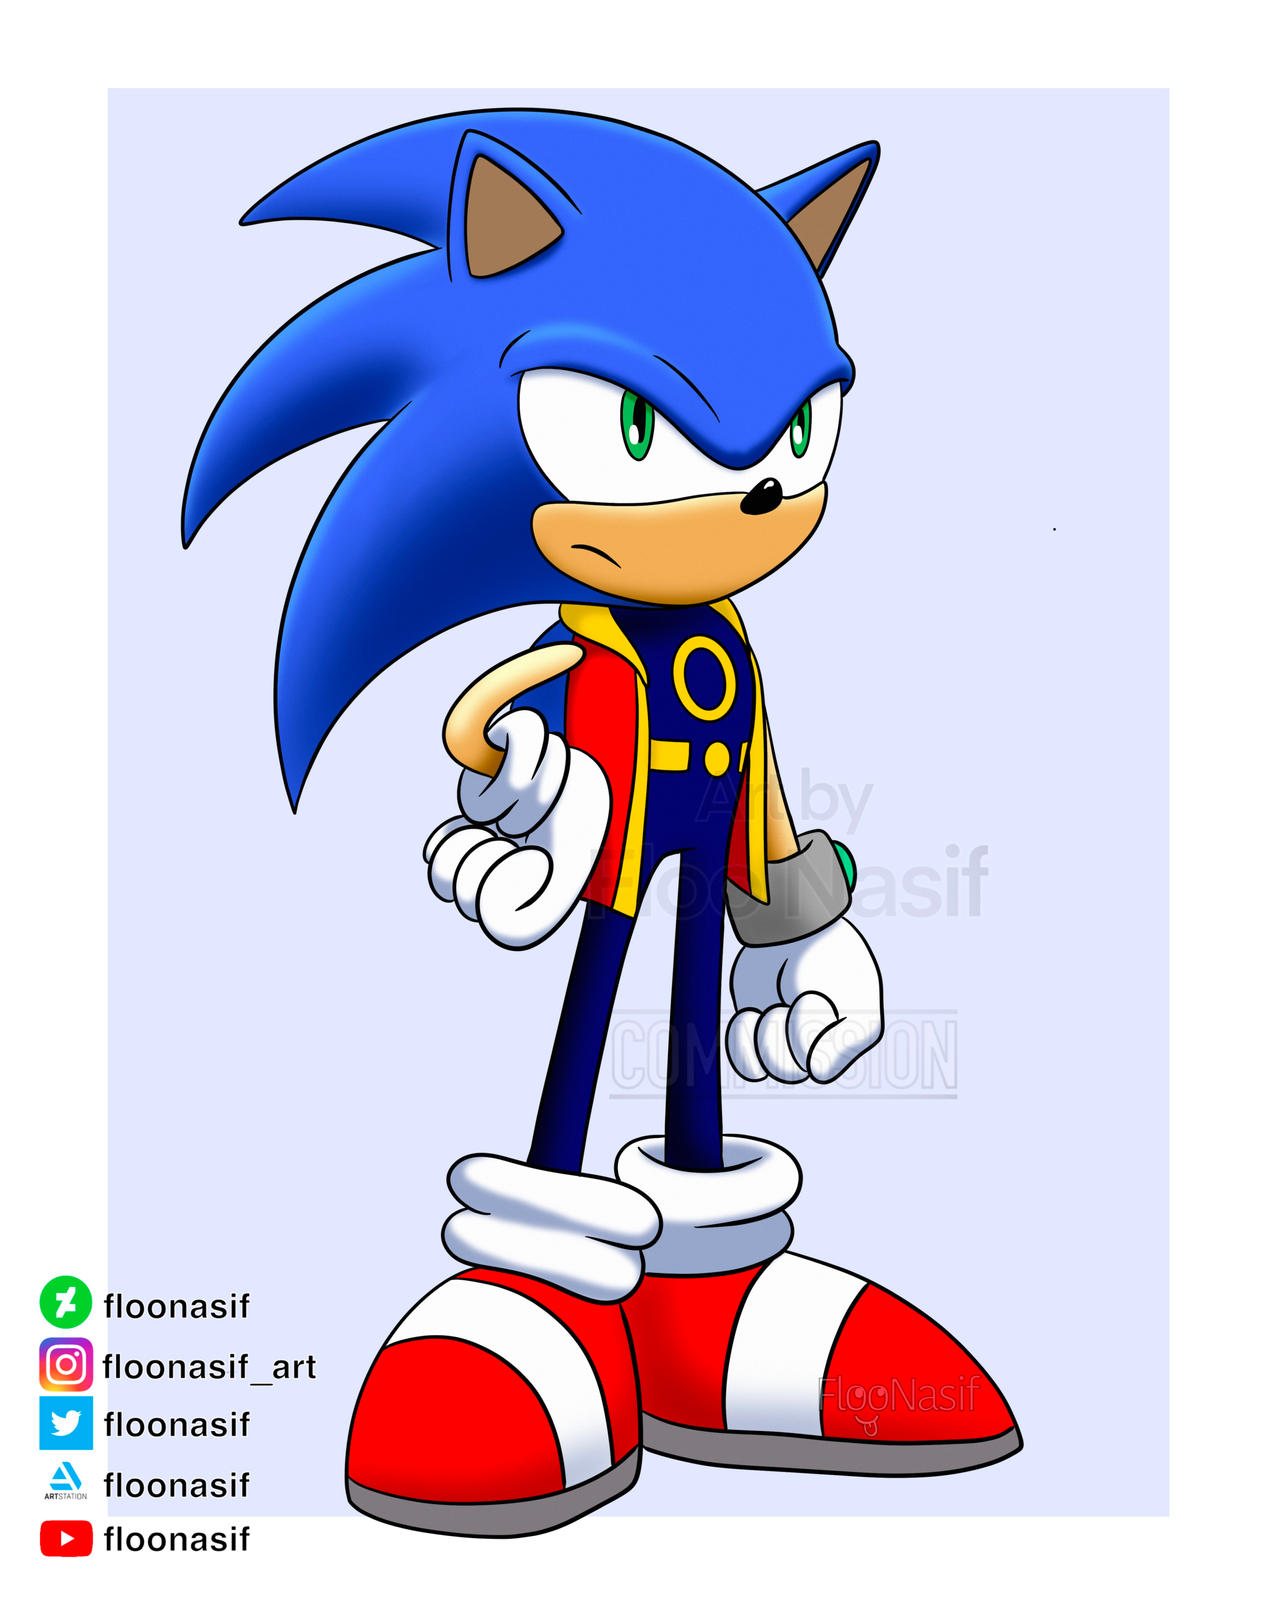 TBSF on X: Here's Another Dark Super Sonic Render!   / X